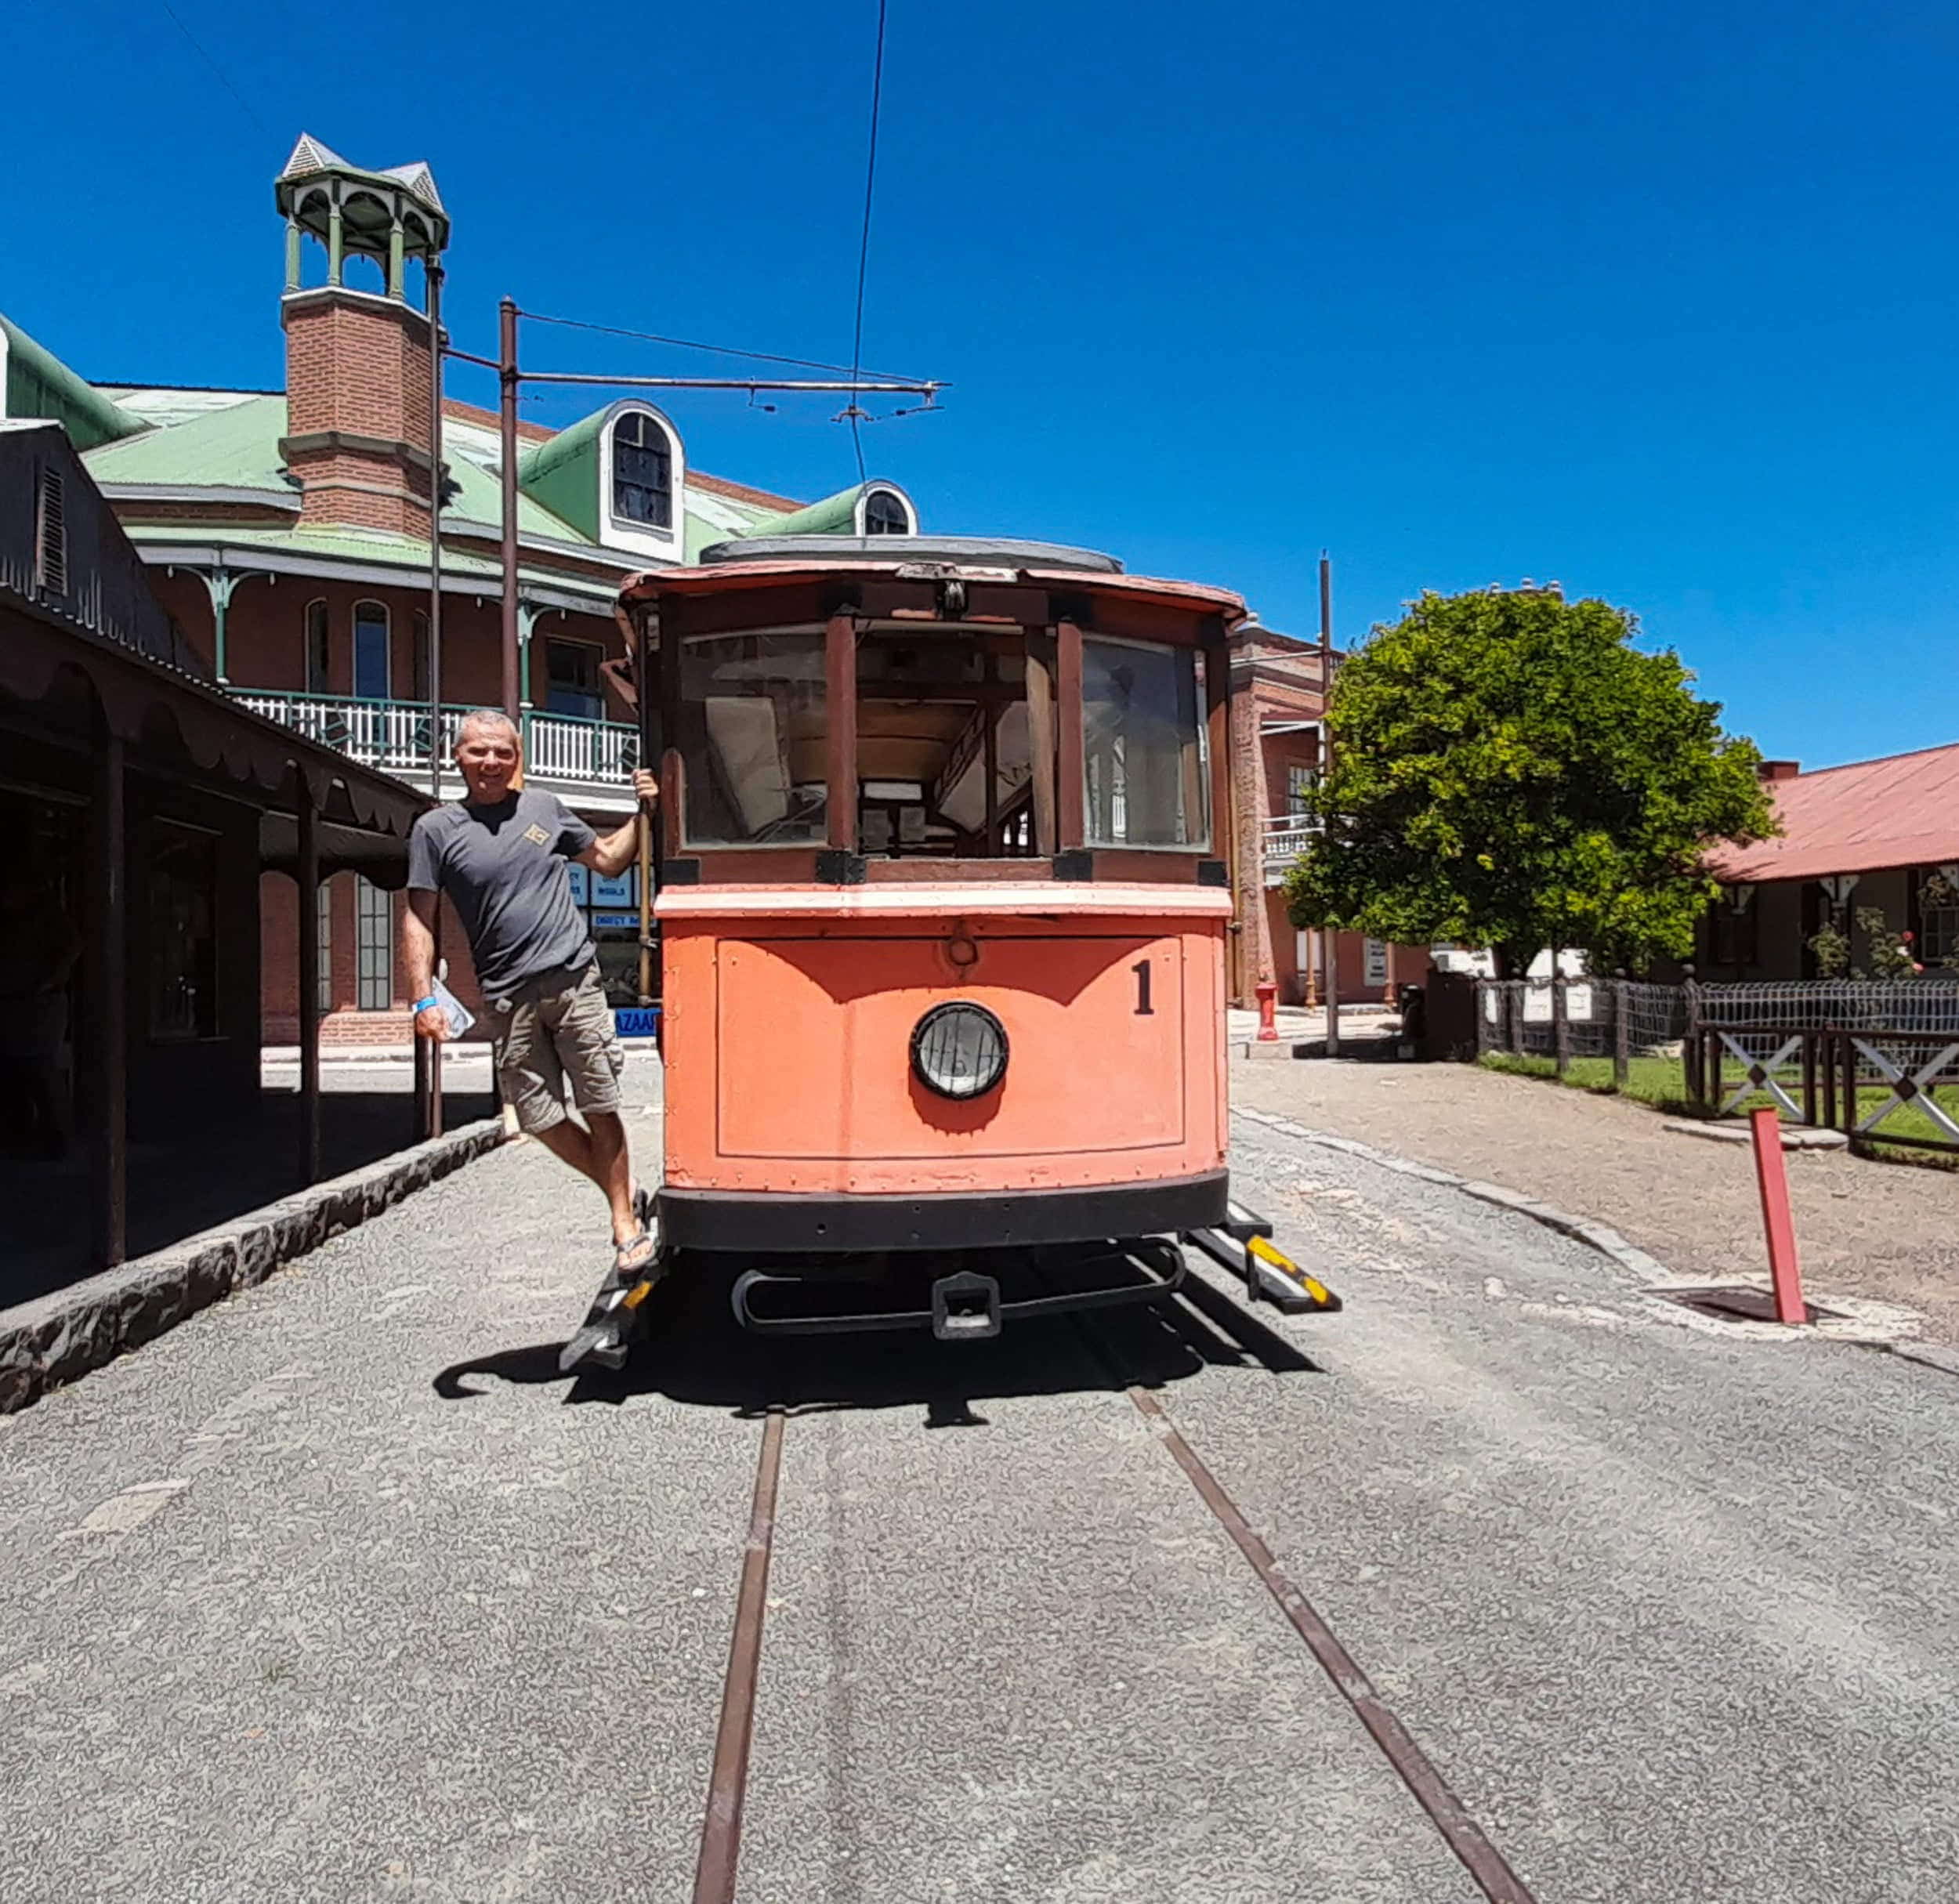 a person posing next to an old tram